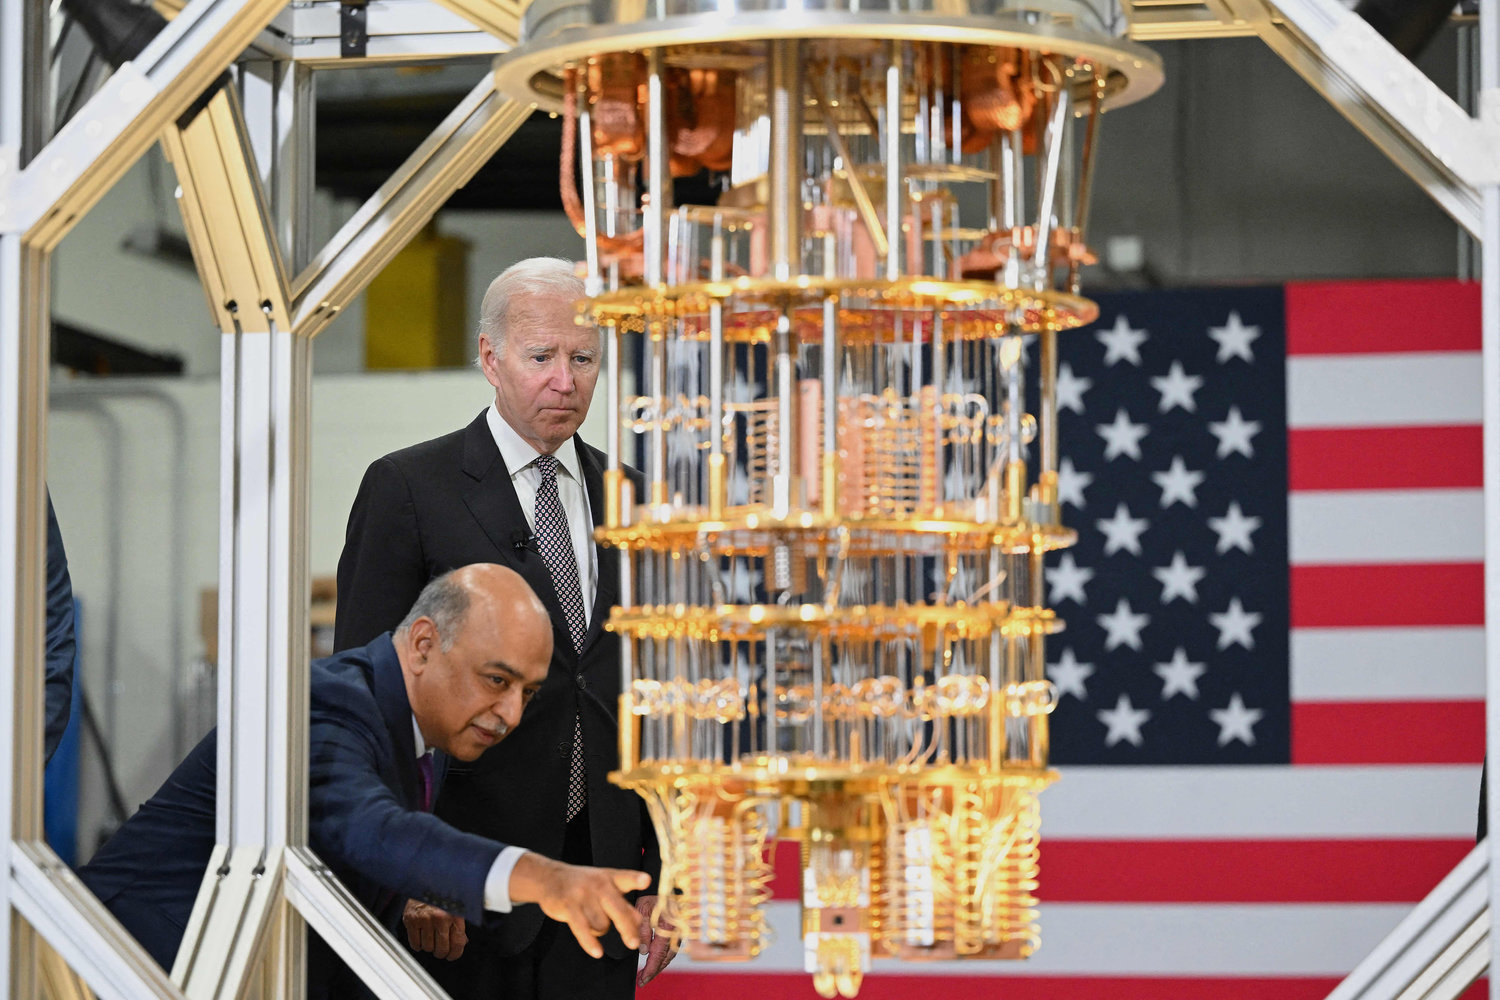 U.S. President Joe Biden listens to IBM CEO Arvind Krishna as he tours the IBM facility in Poughkeepsie, New York, on October 6, 2022. - IBM's CEO Arvind Krishna announced Thursday a $20-billion investment in quantum computing, semiconductor manufacturing, and other high-tech areas in its New York state facilities. (MANDEL NGAN/AFP via Getty Images/TNS)